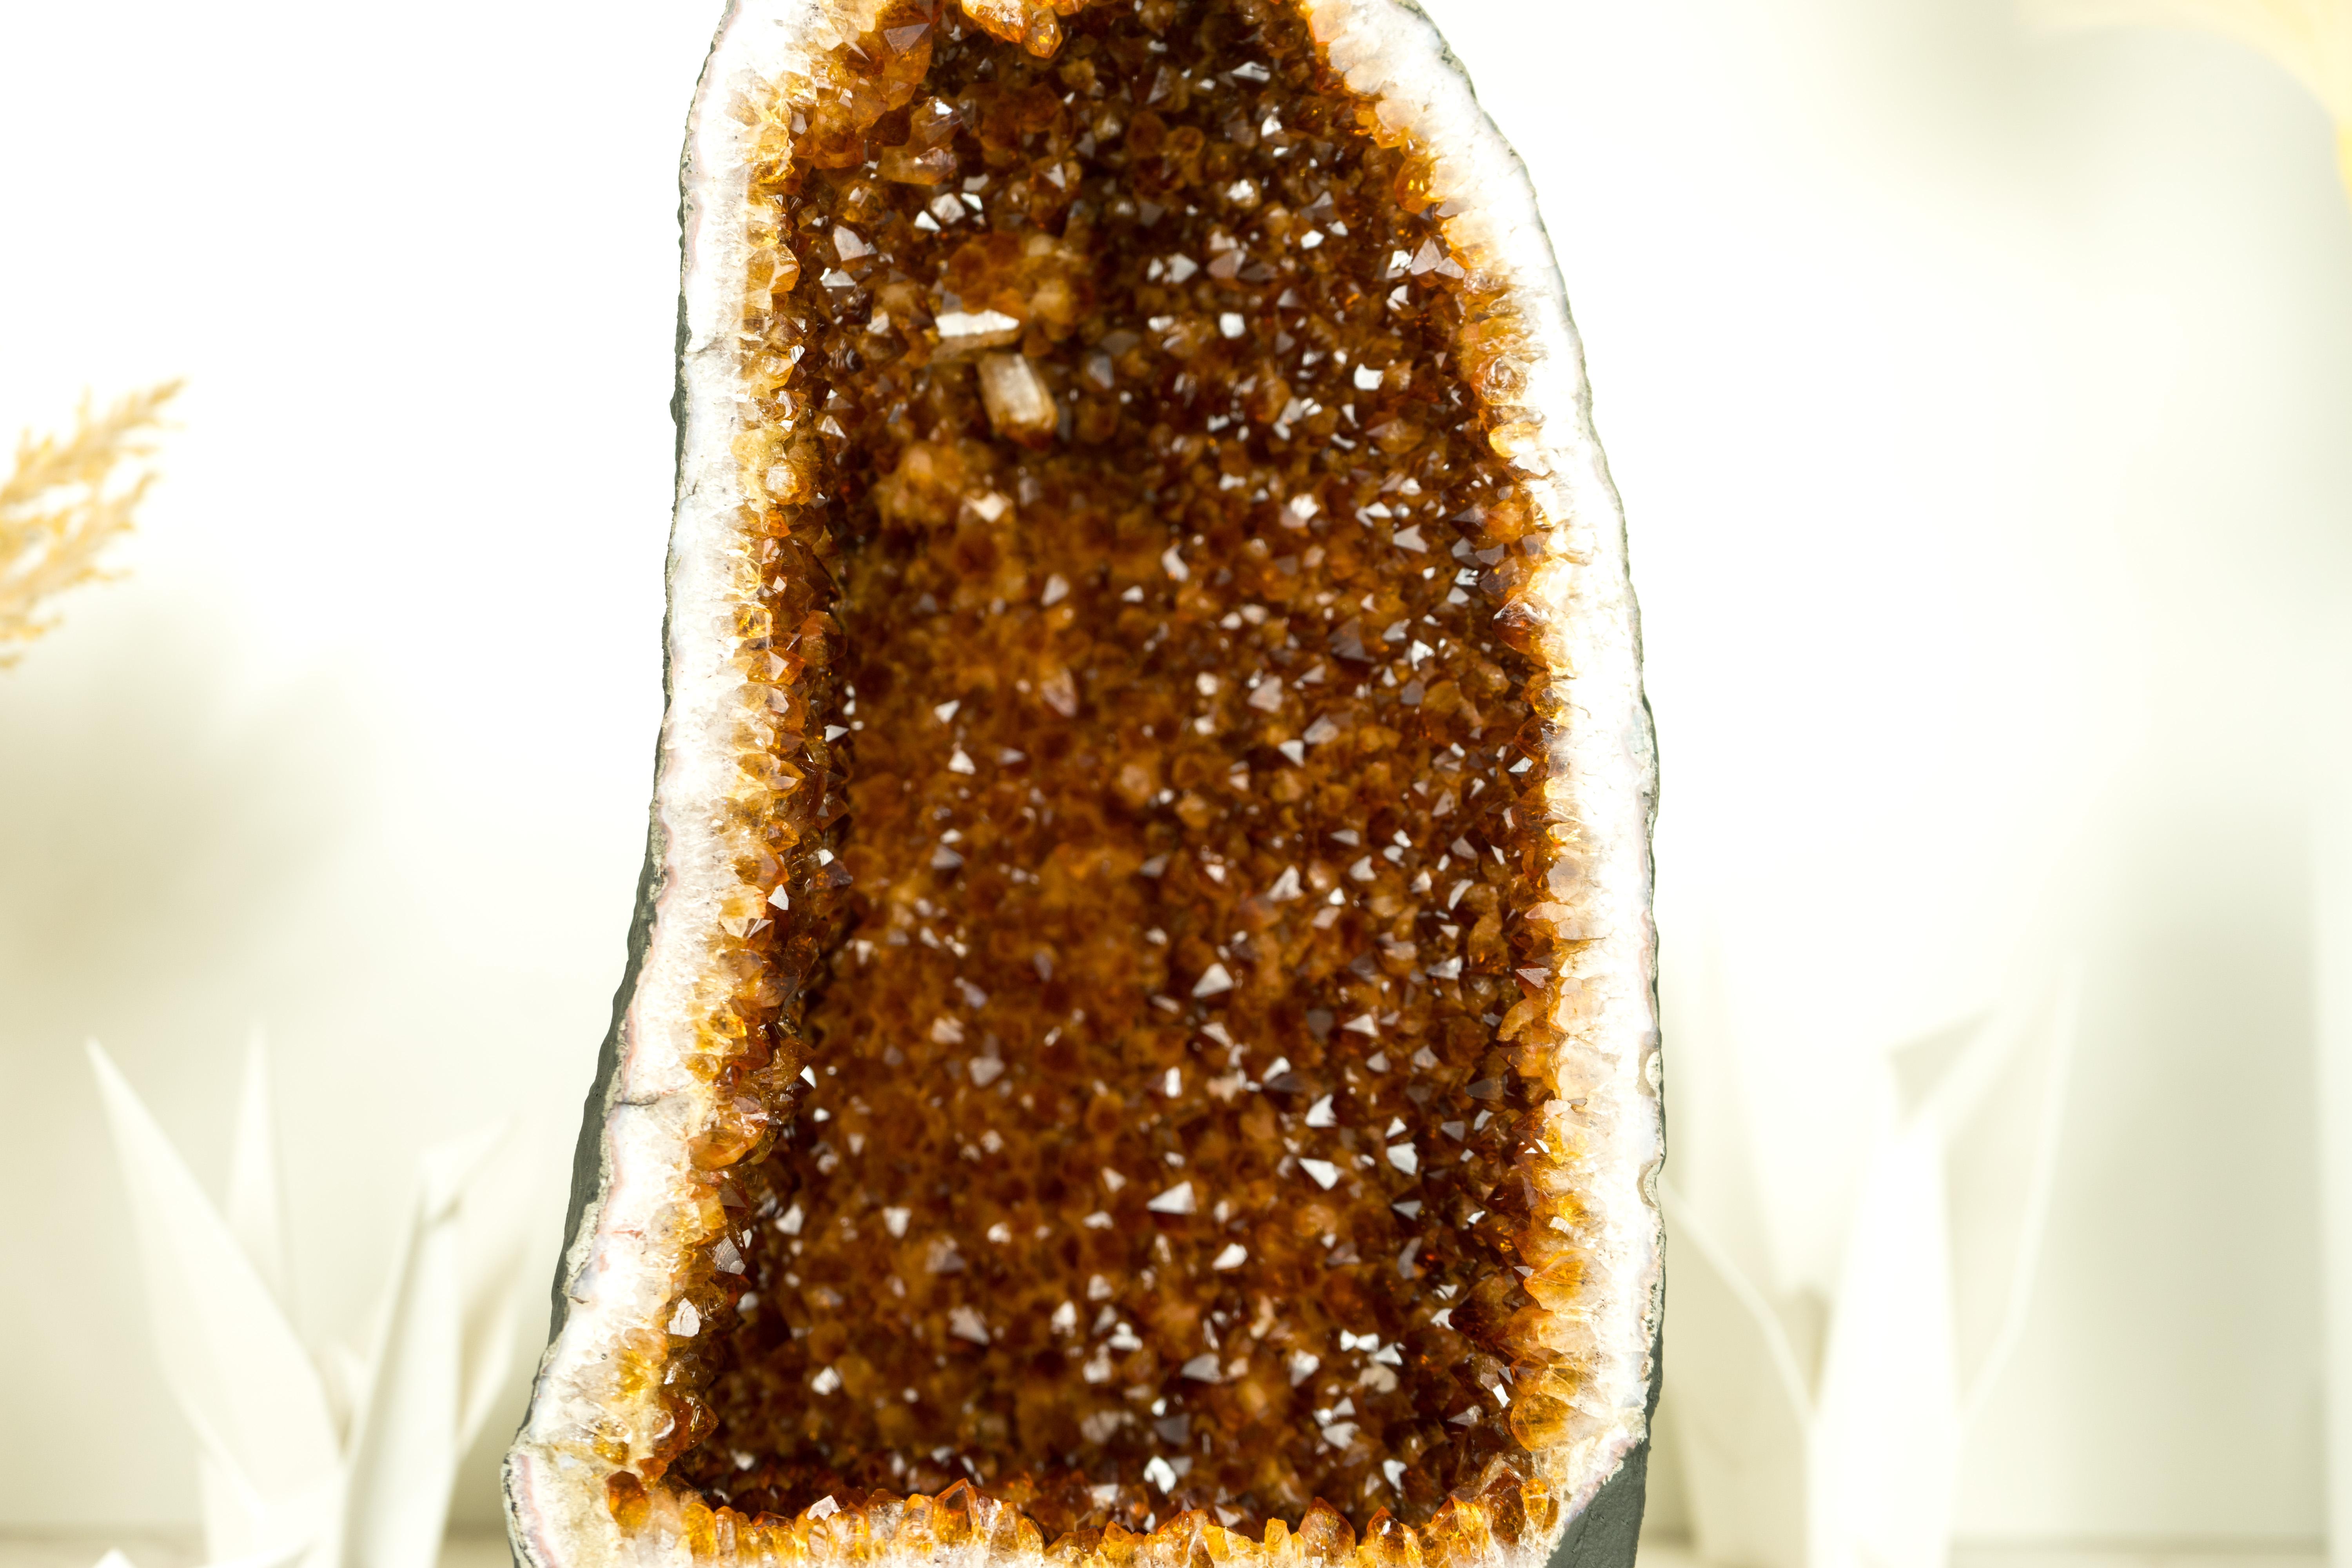 Gorgeous in many ways, this Madeira Citrine Geode is a masterpiece that showcases special and rare characteristics, from its vibrant madeira citrine color, AAA points, to its flawless formation. This AAA (AKA Super Extra) grade Citrine is a